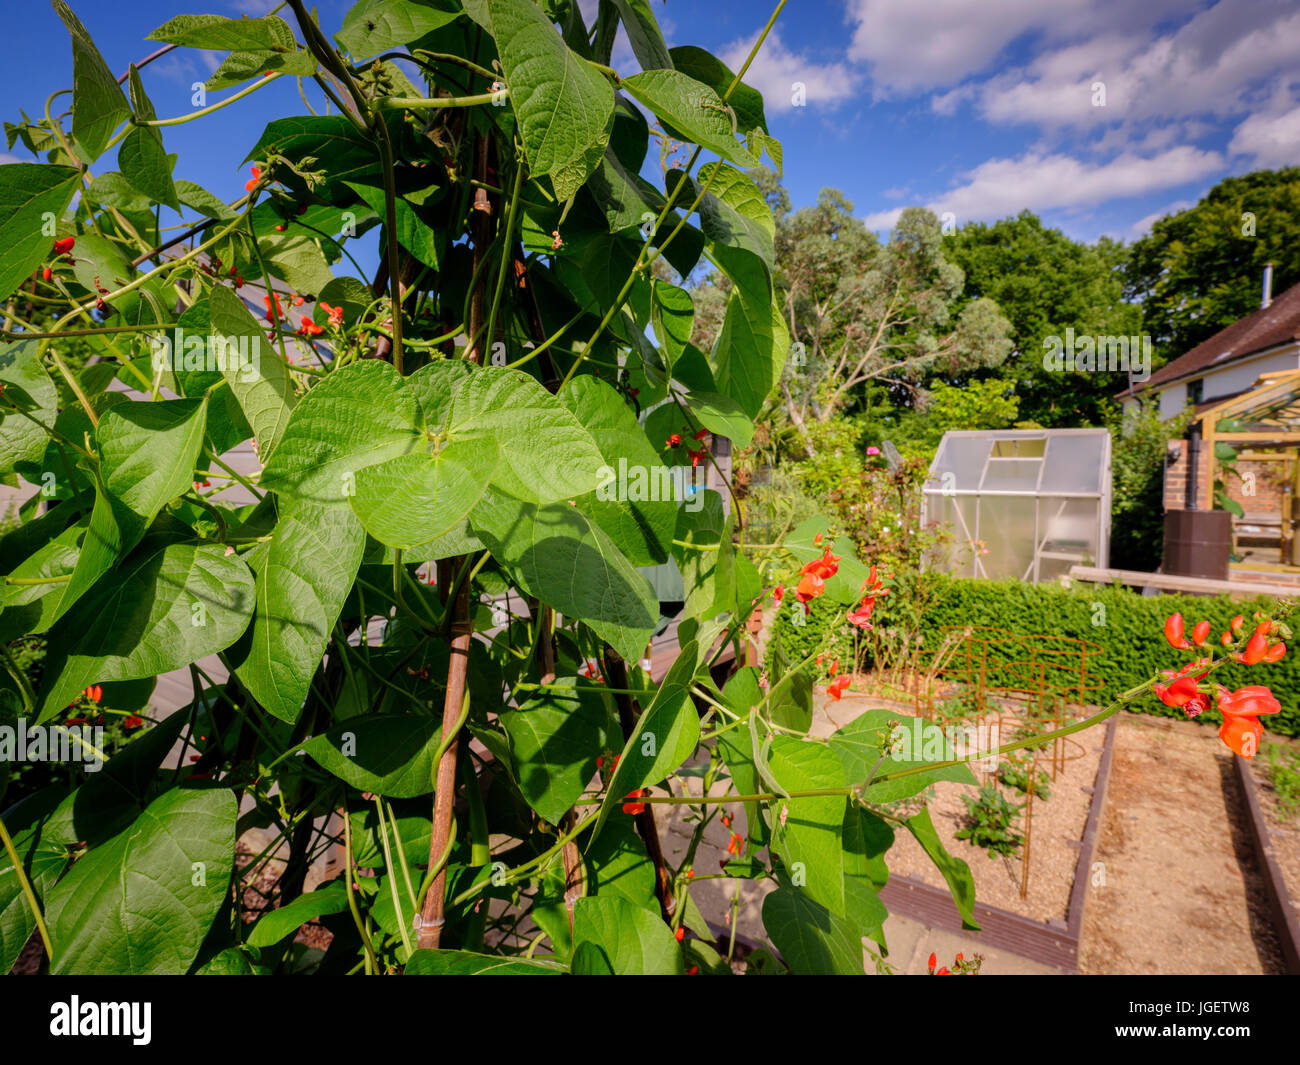 Runner beans in an English country garden in summertime with greenhouse in background. Sussex, UK Stock Photo